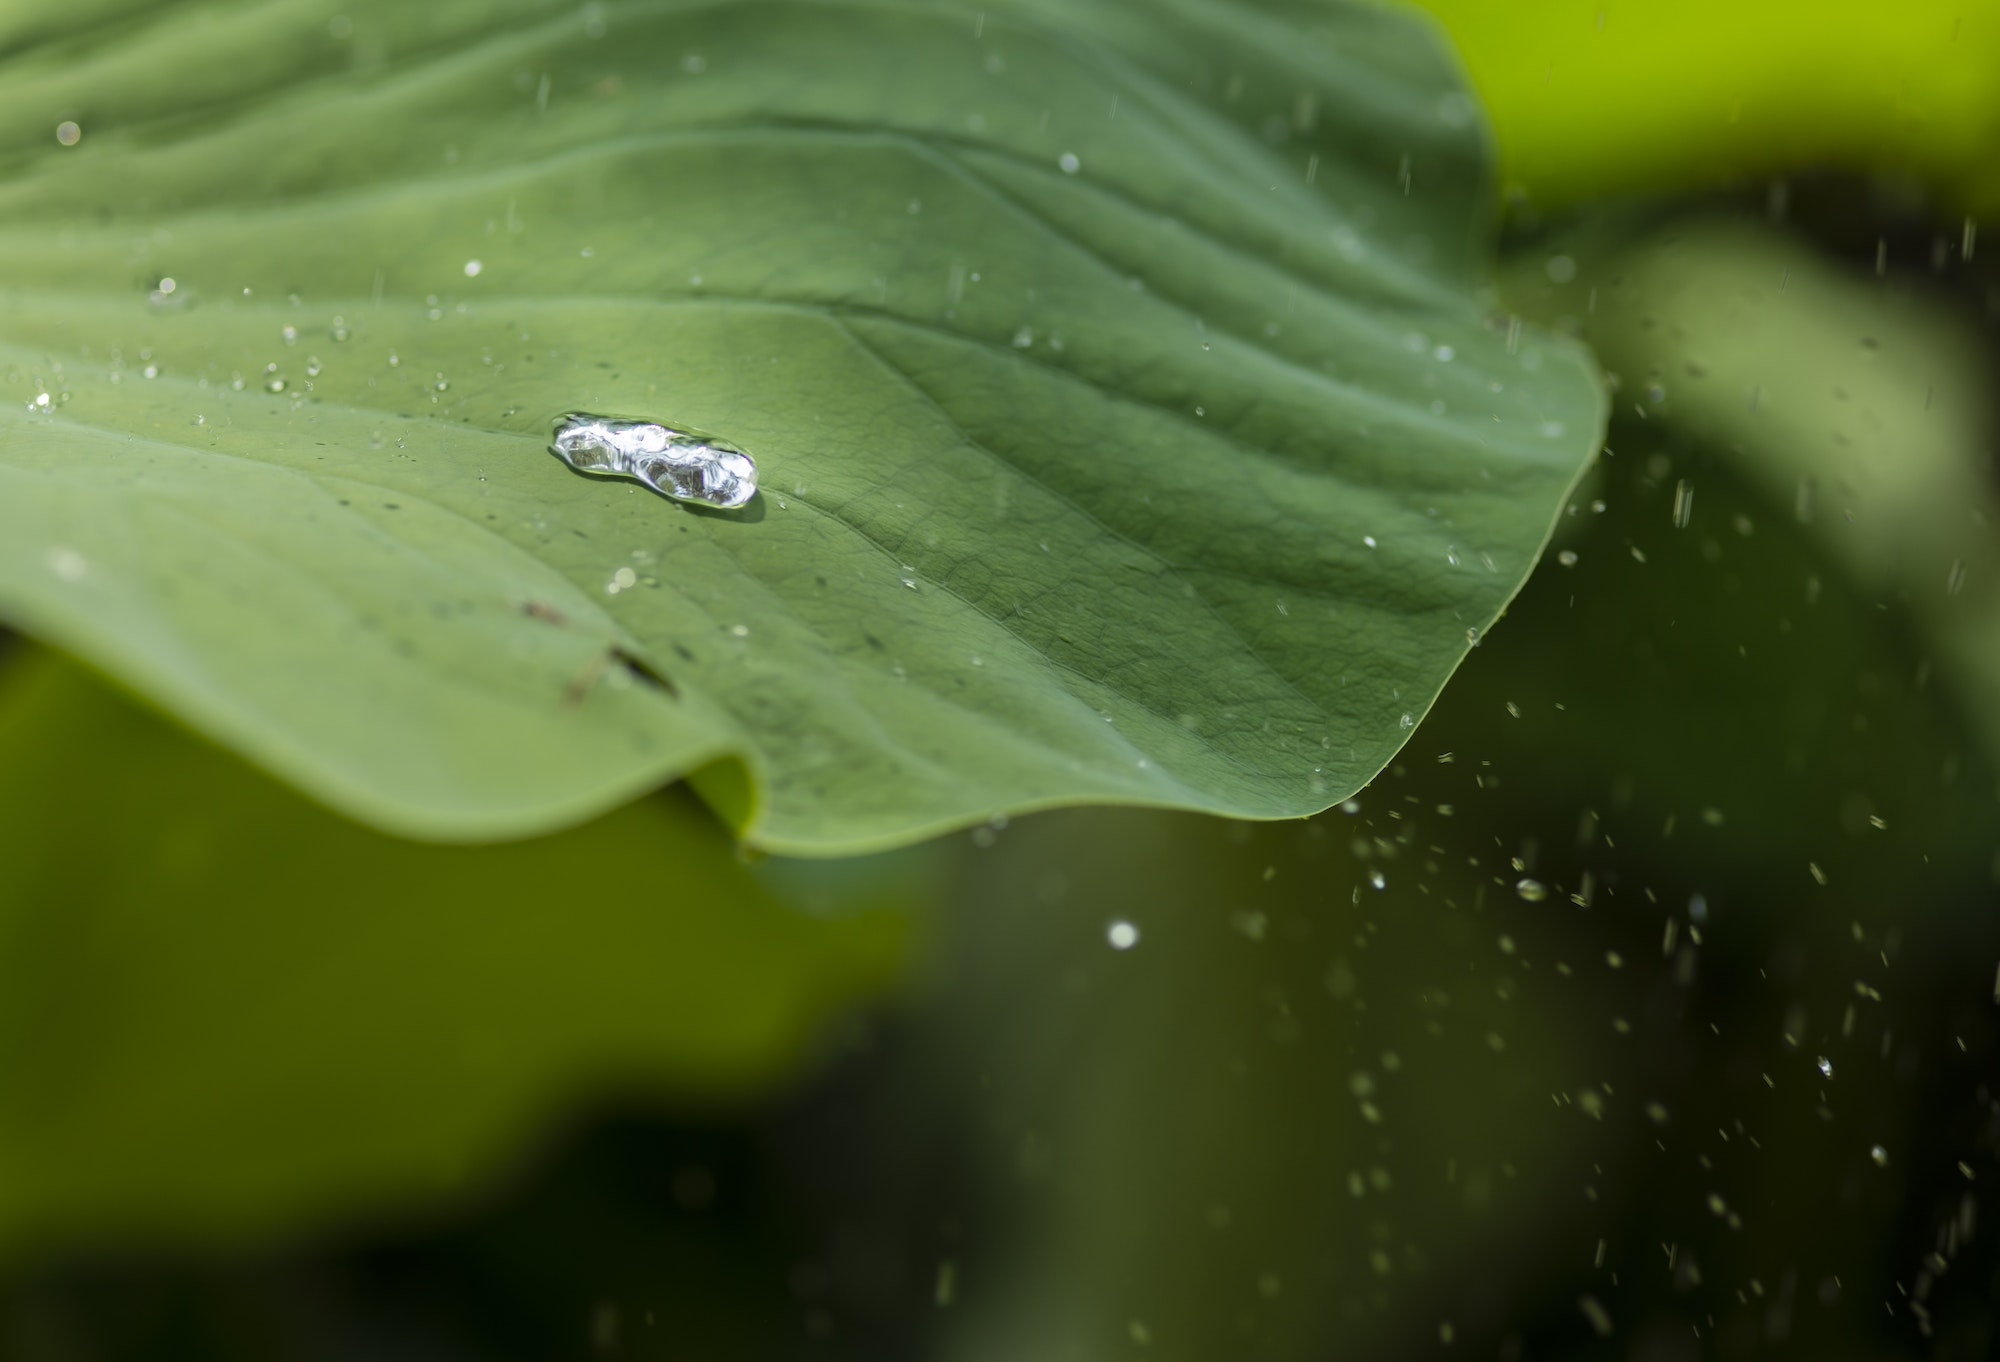 Water drops on green leaves - coping with loss